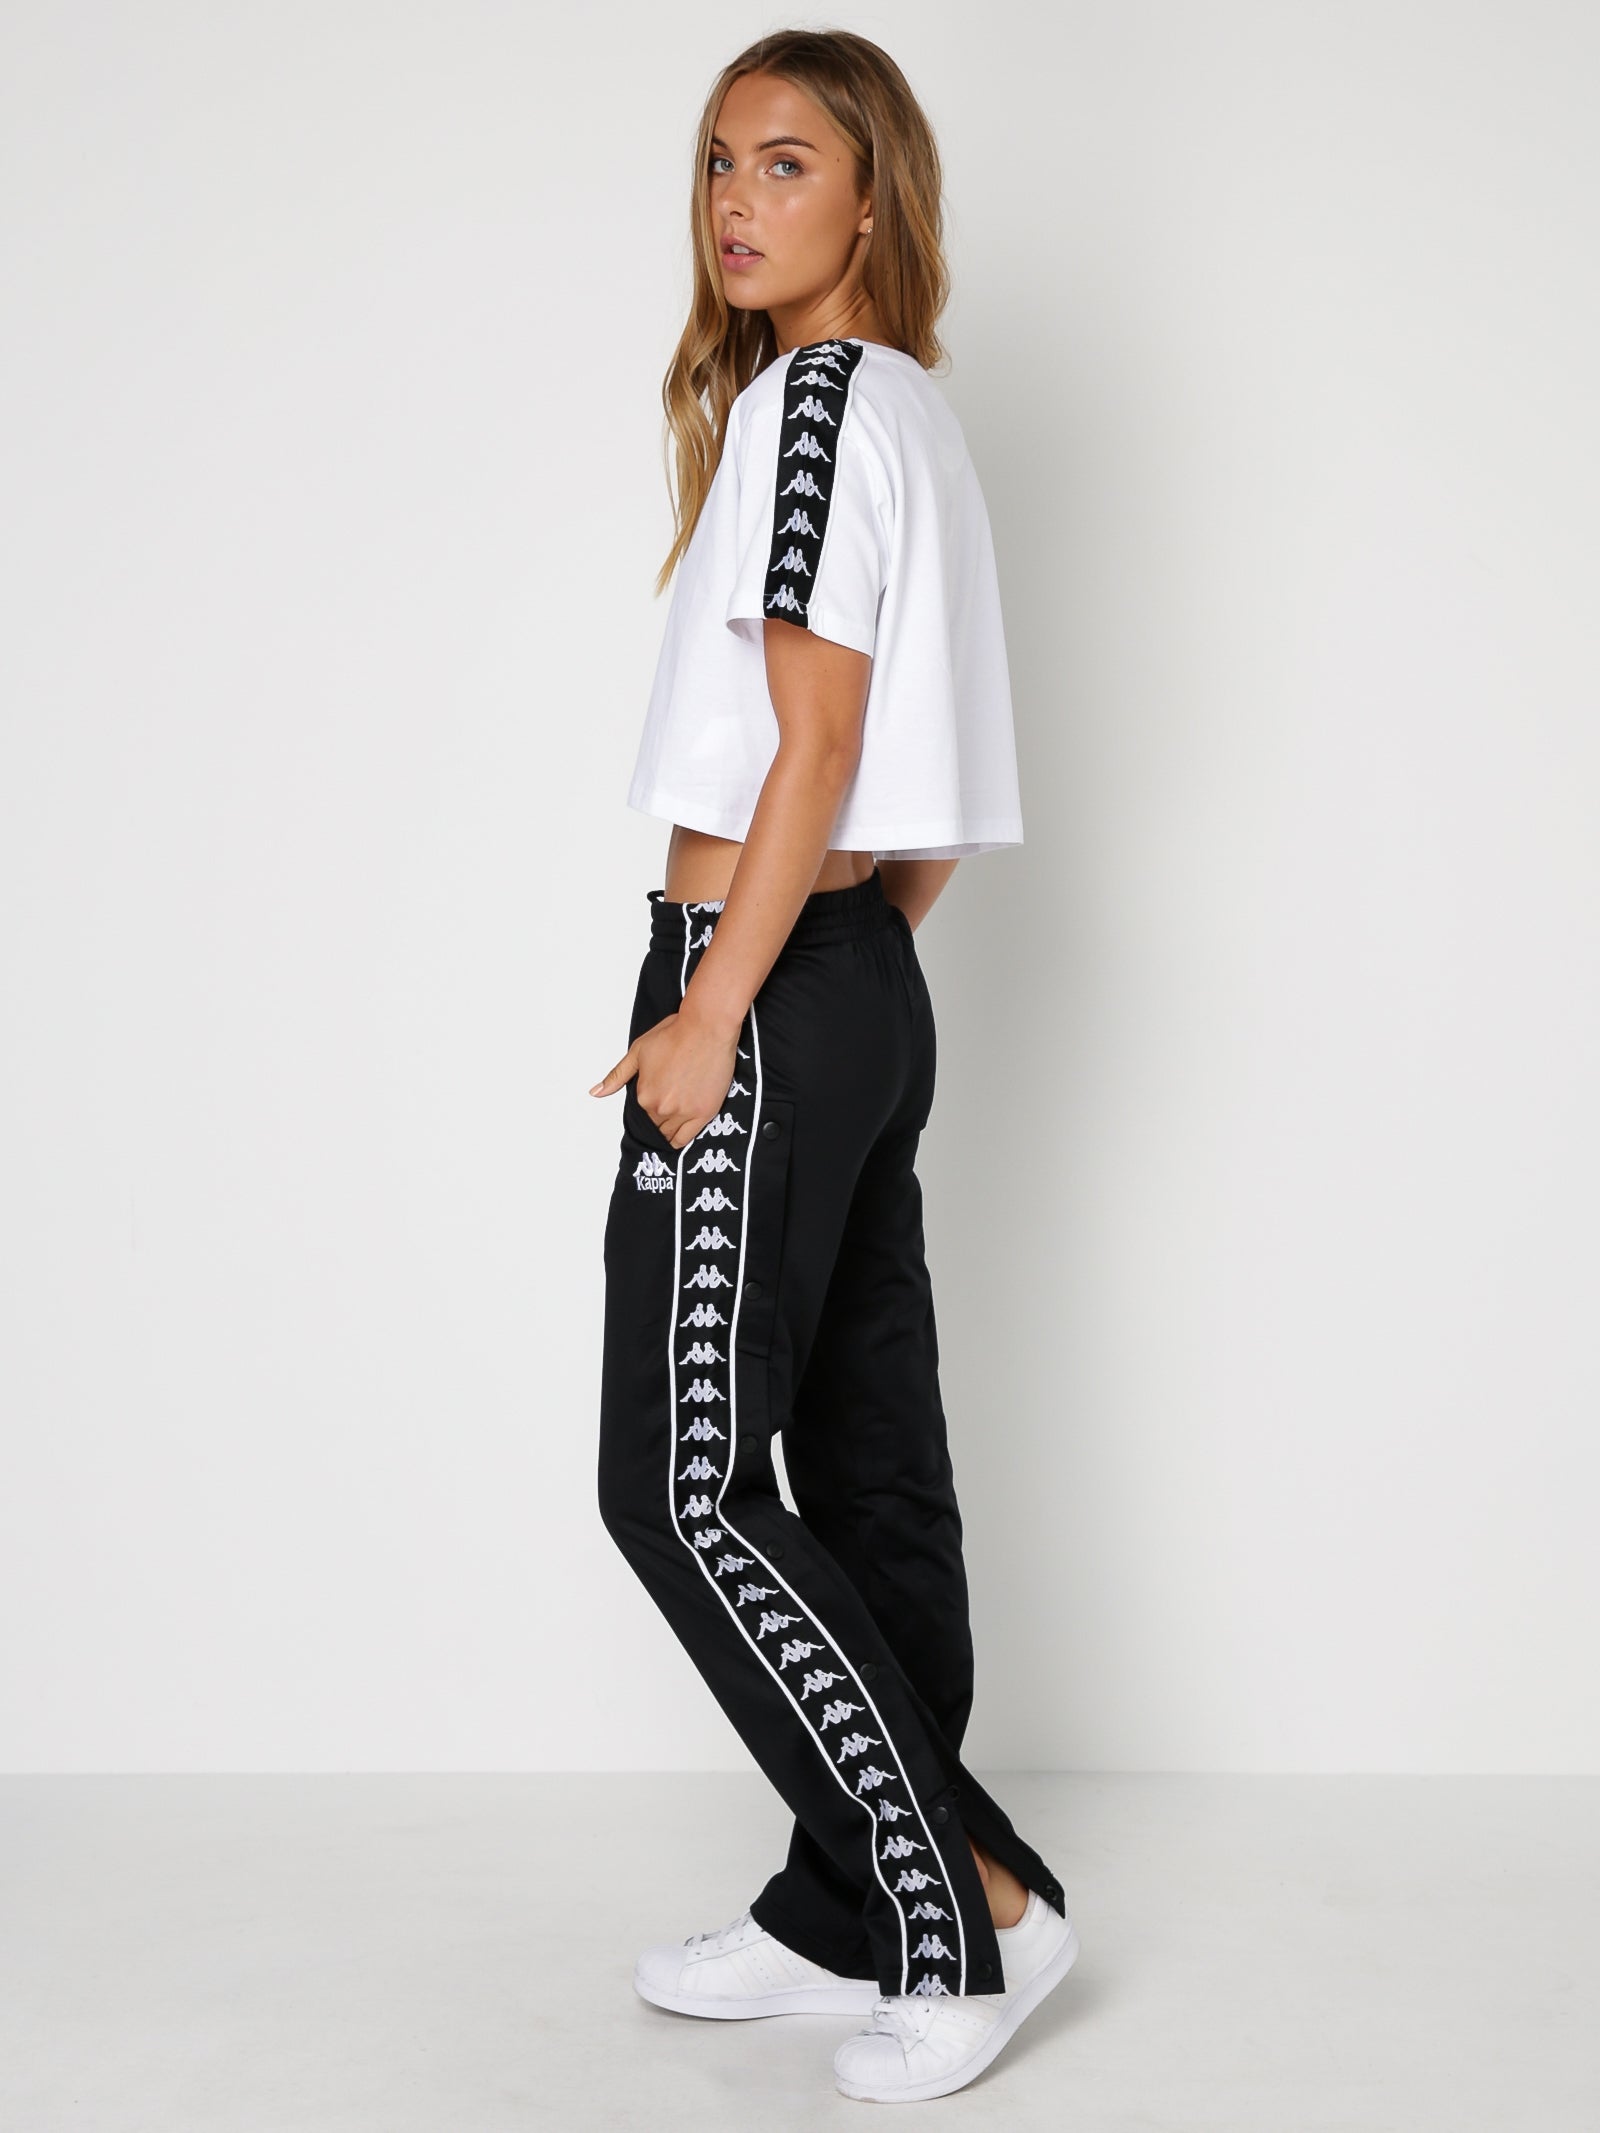 Kappa Trousers for Women - Vestiaire Collective